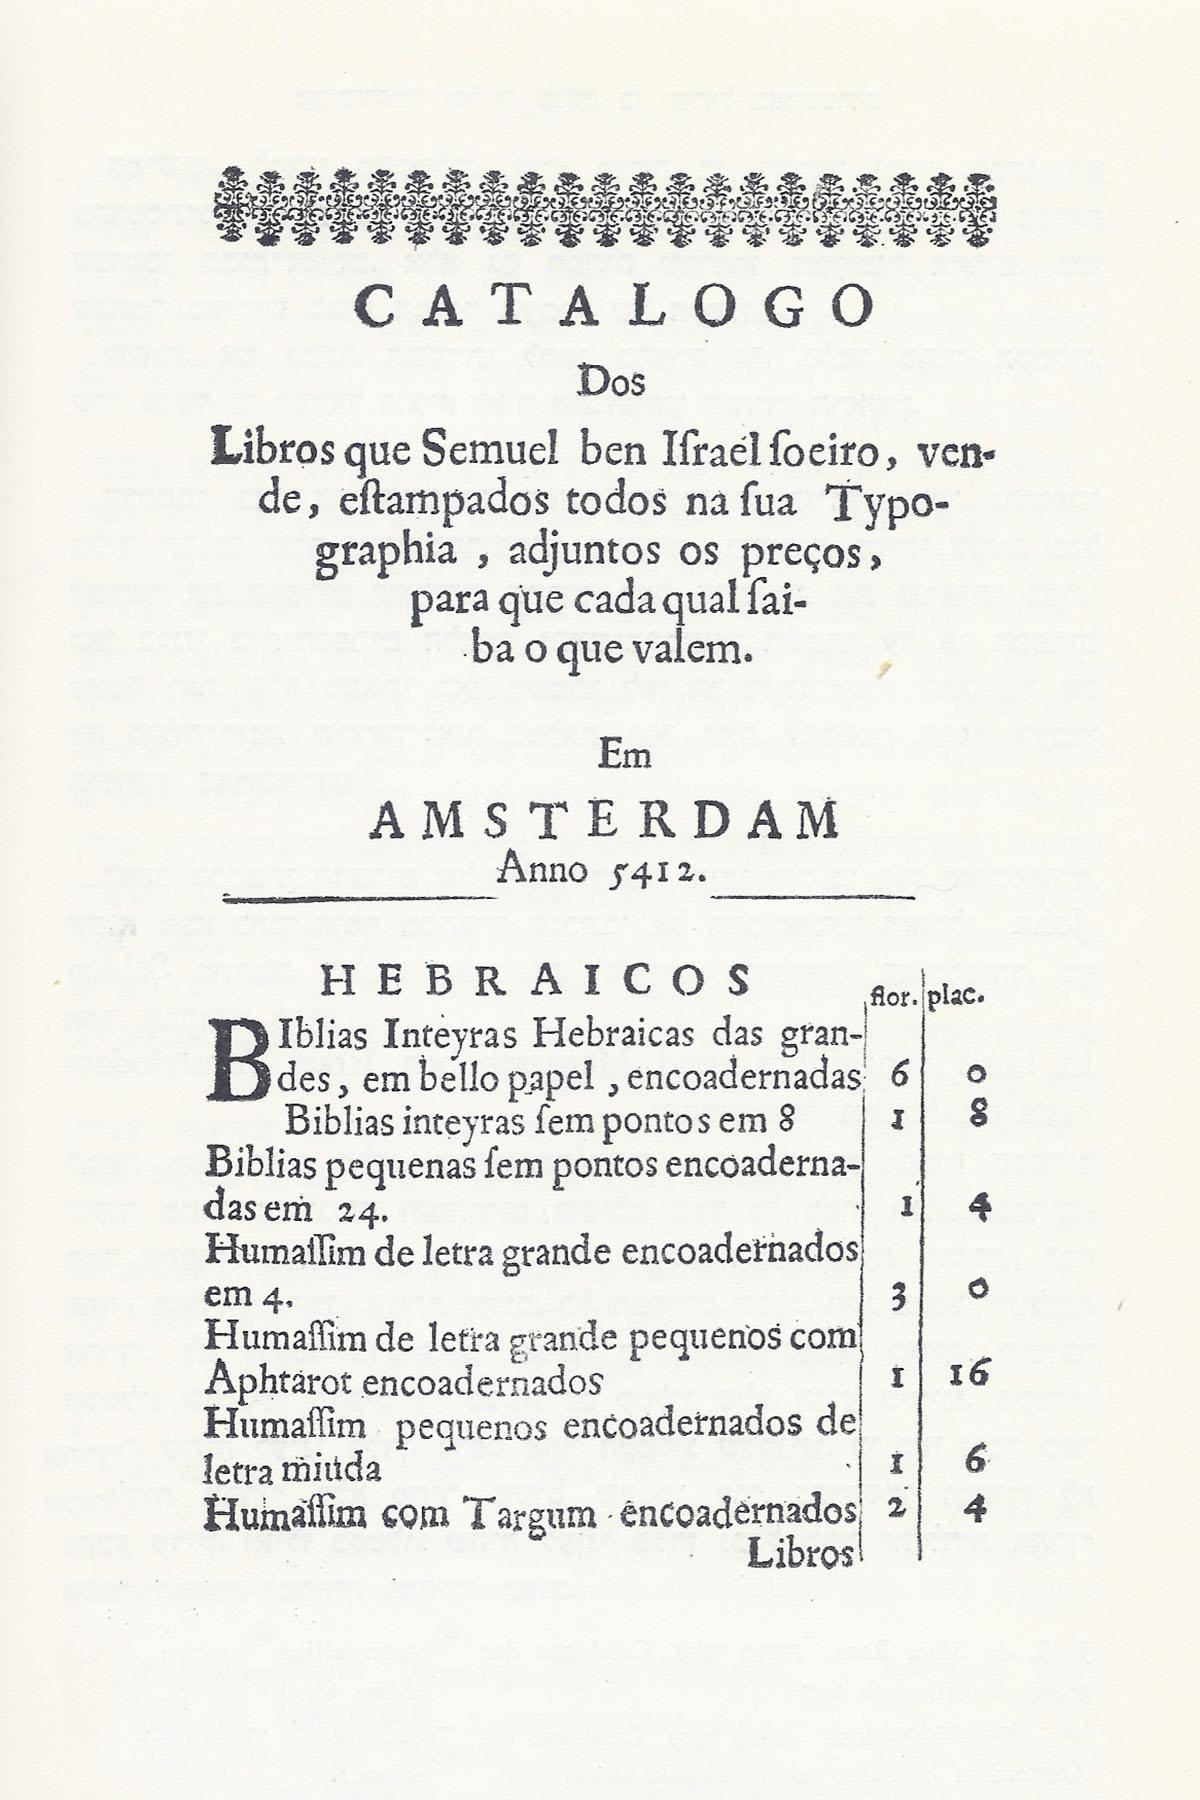 Printed page in Portuguese with two narrow columns on right of main text.